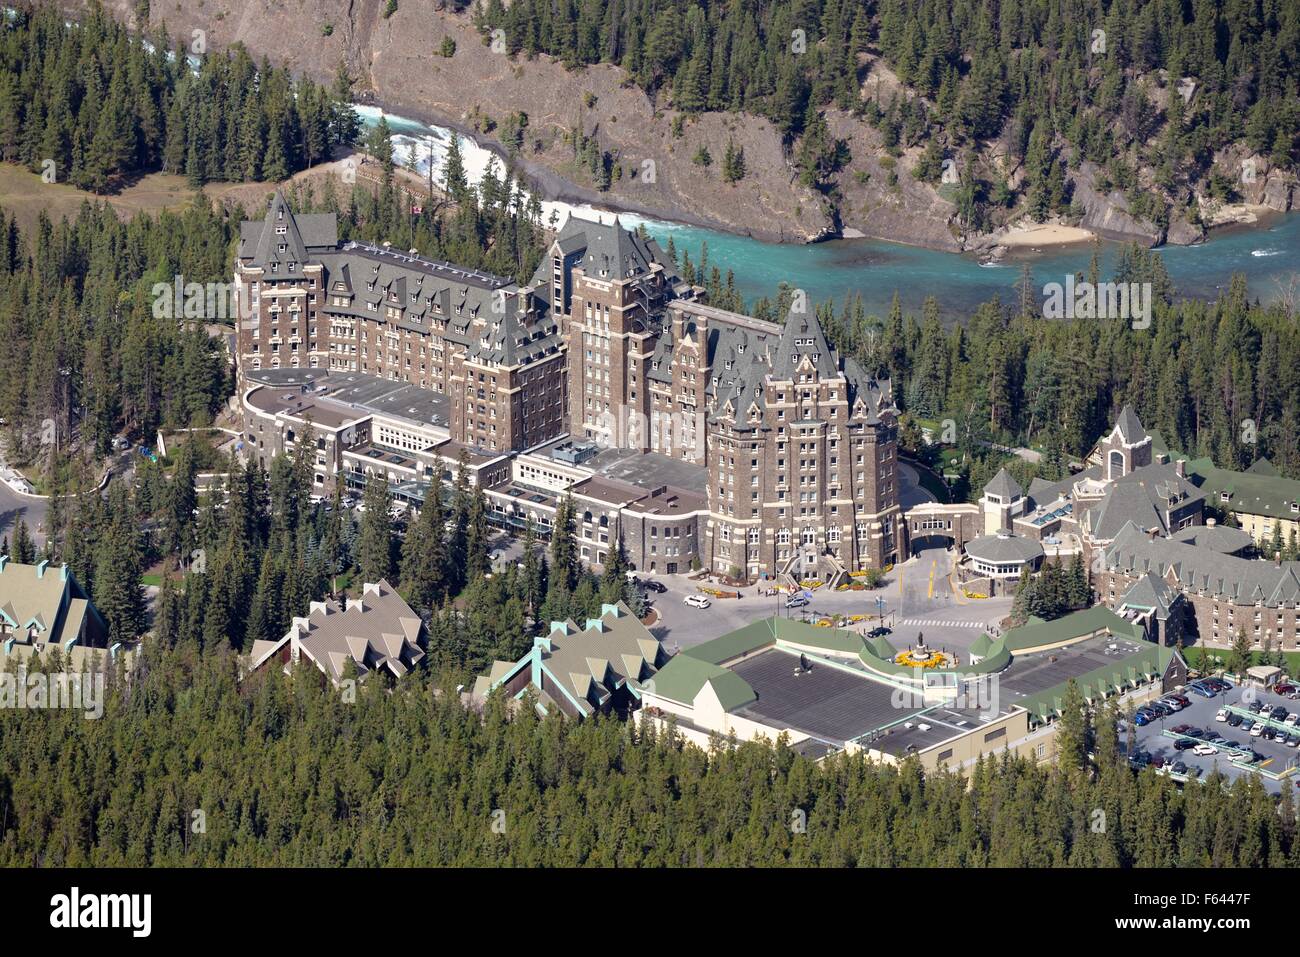 View Of The Fairmont Banff Springs Hotel Alberta Canada From Stock